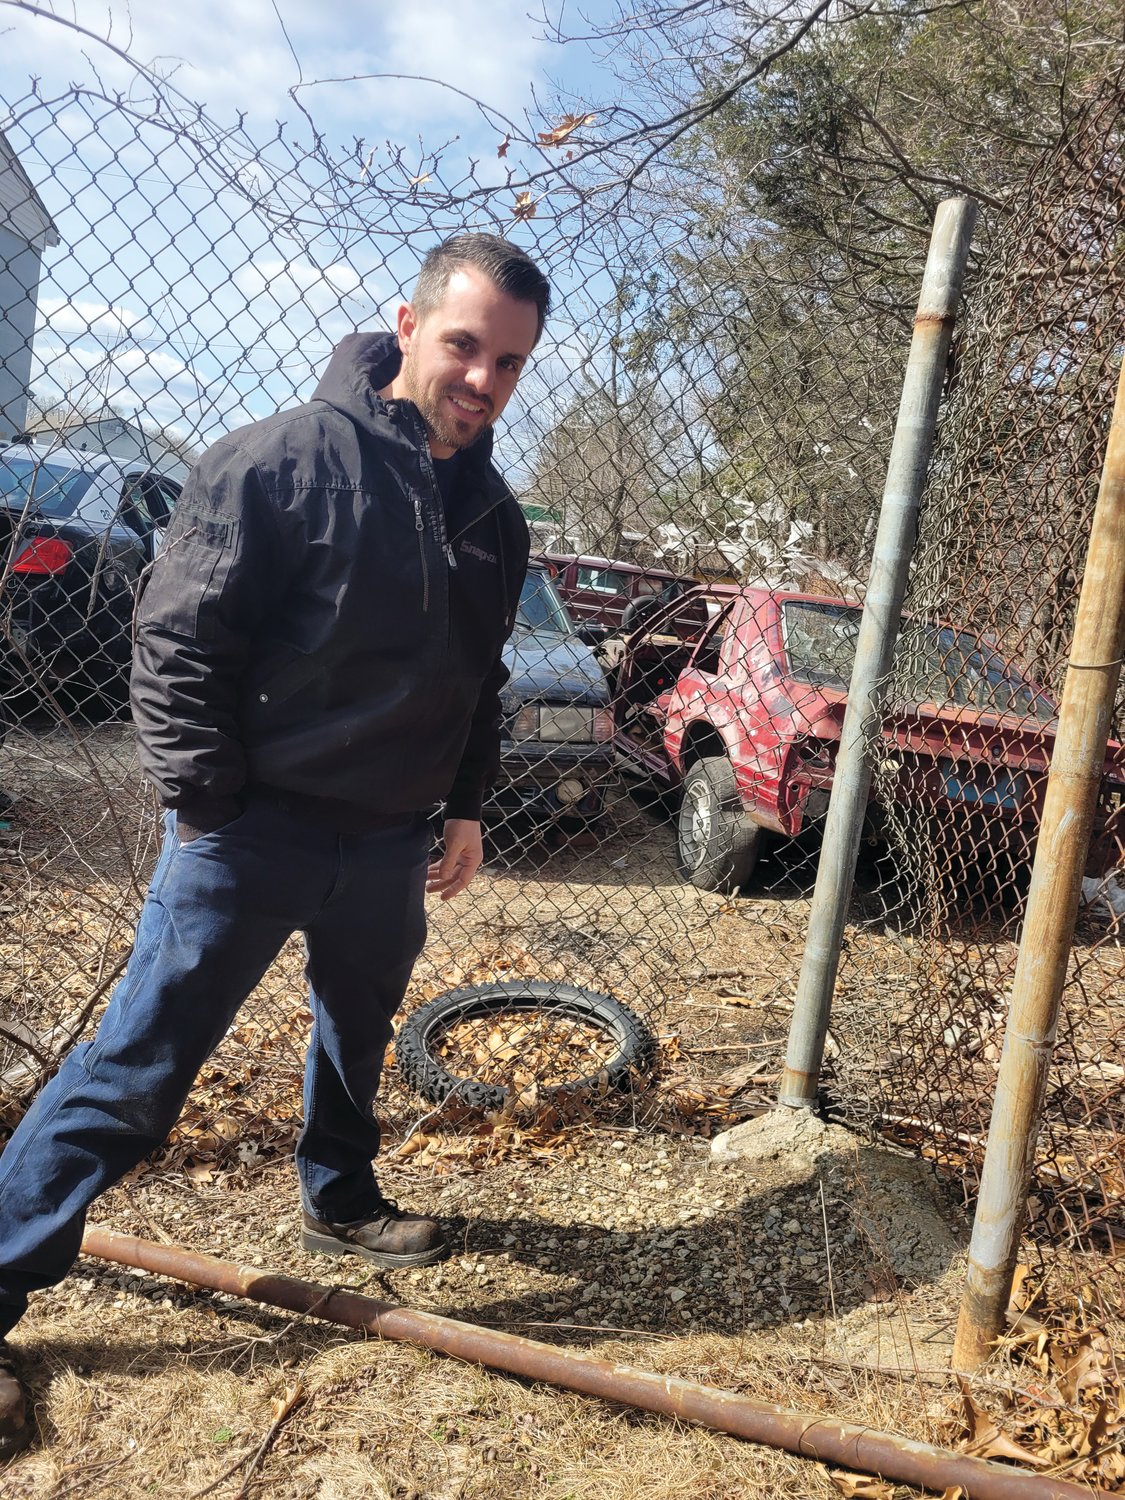 THE CATALYTIC AVENGER: Daniel S. Walser III, owner of Walser Mobile Refrigeration, refused to be a victim. He tracked down the suspect who swiped catalytic converters from his Warwick business. Earlier this week, Walser showed the partially mended hole the suspect cut in the fence surrounding the property.